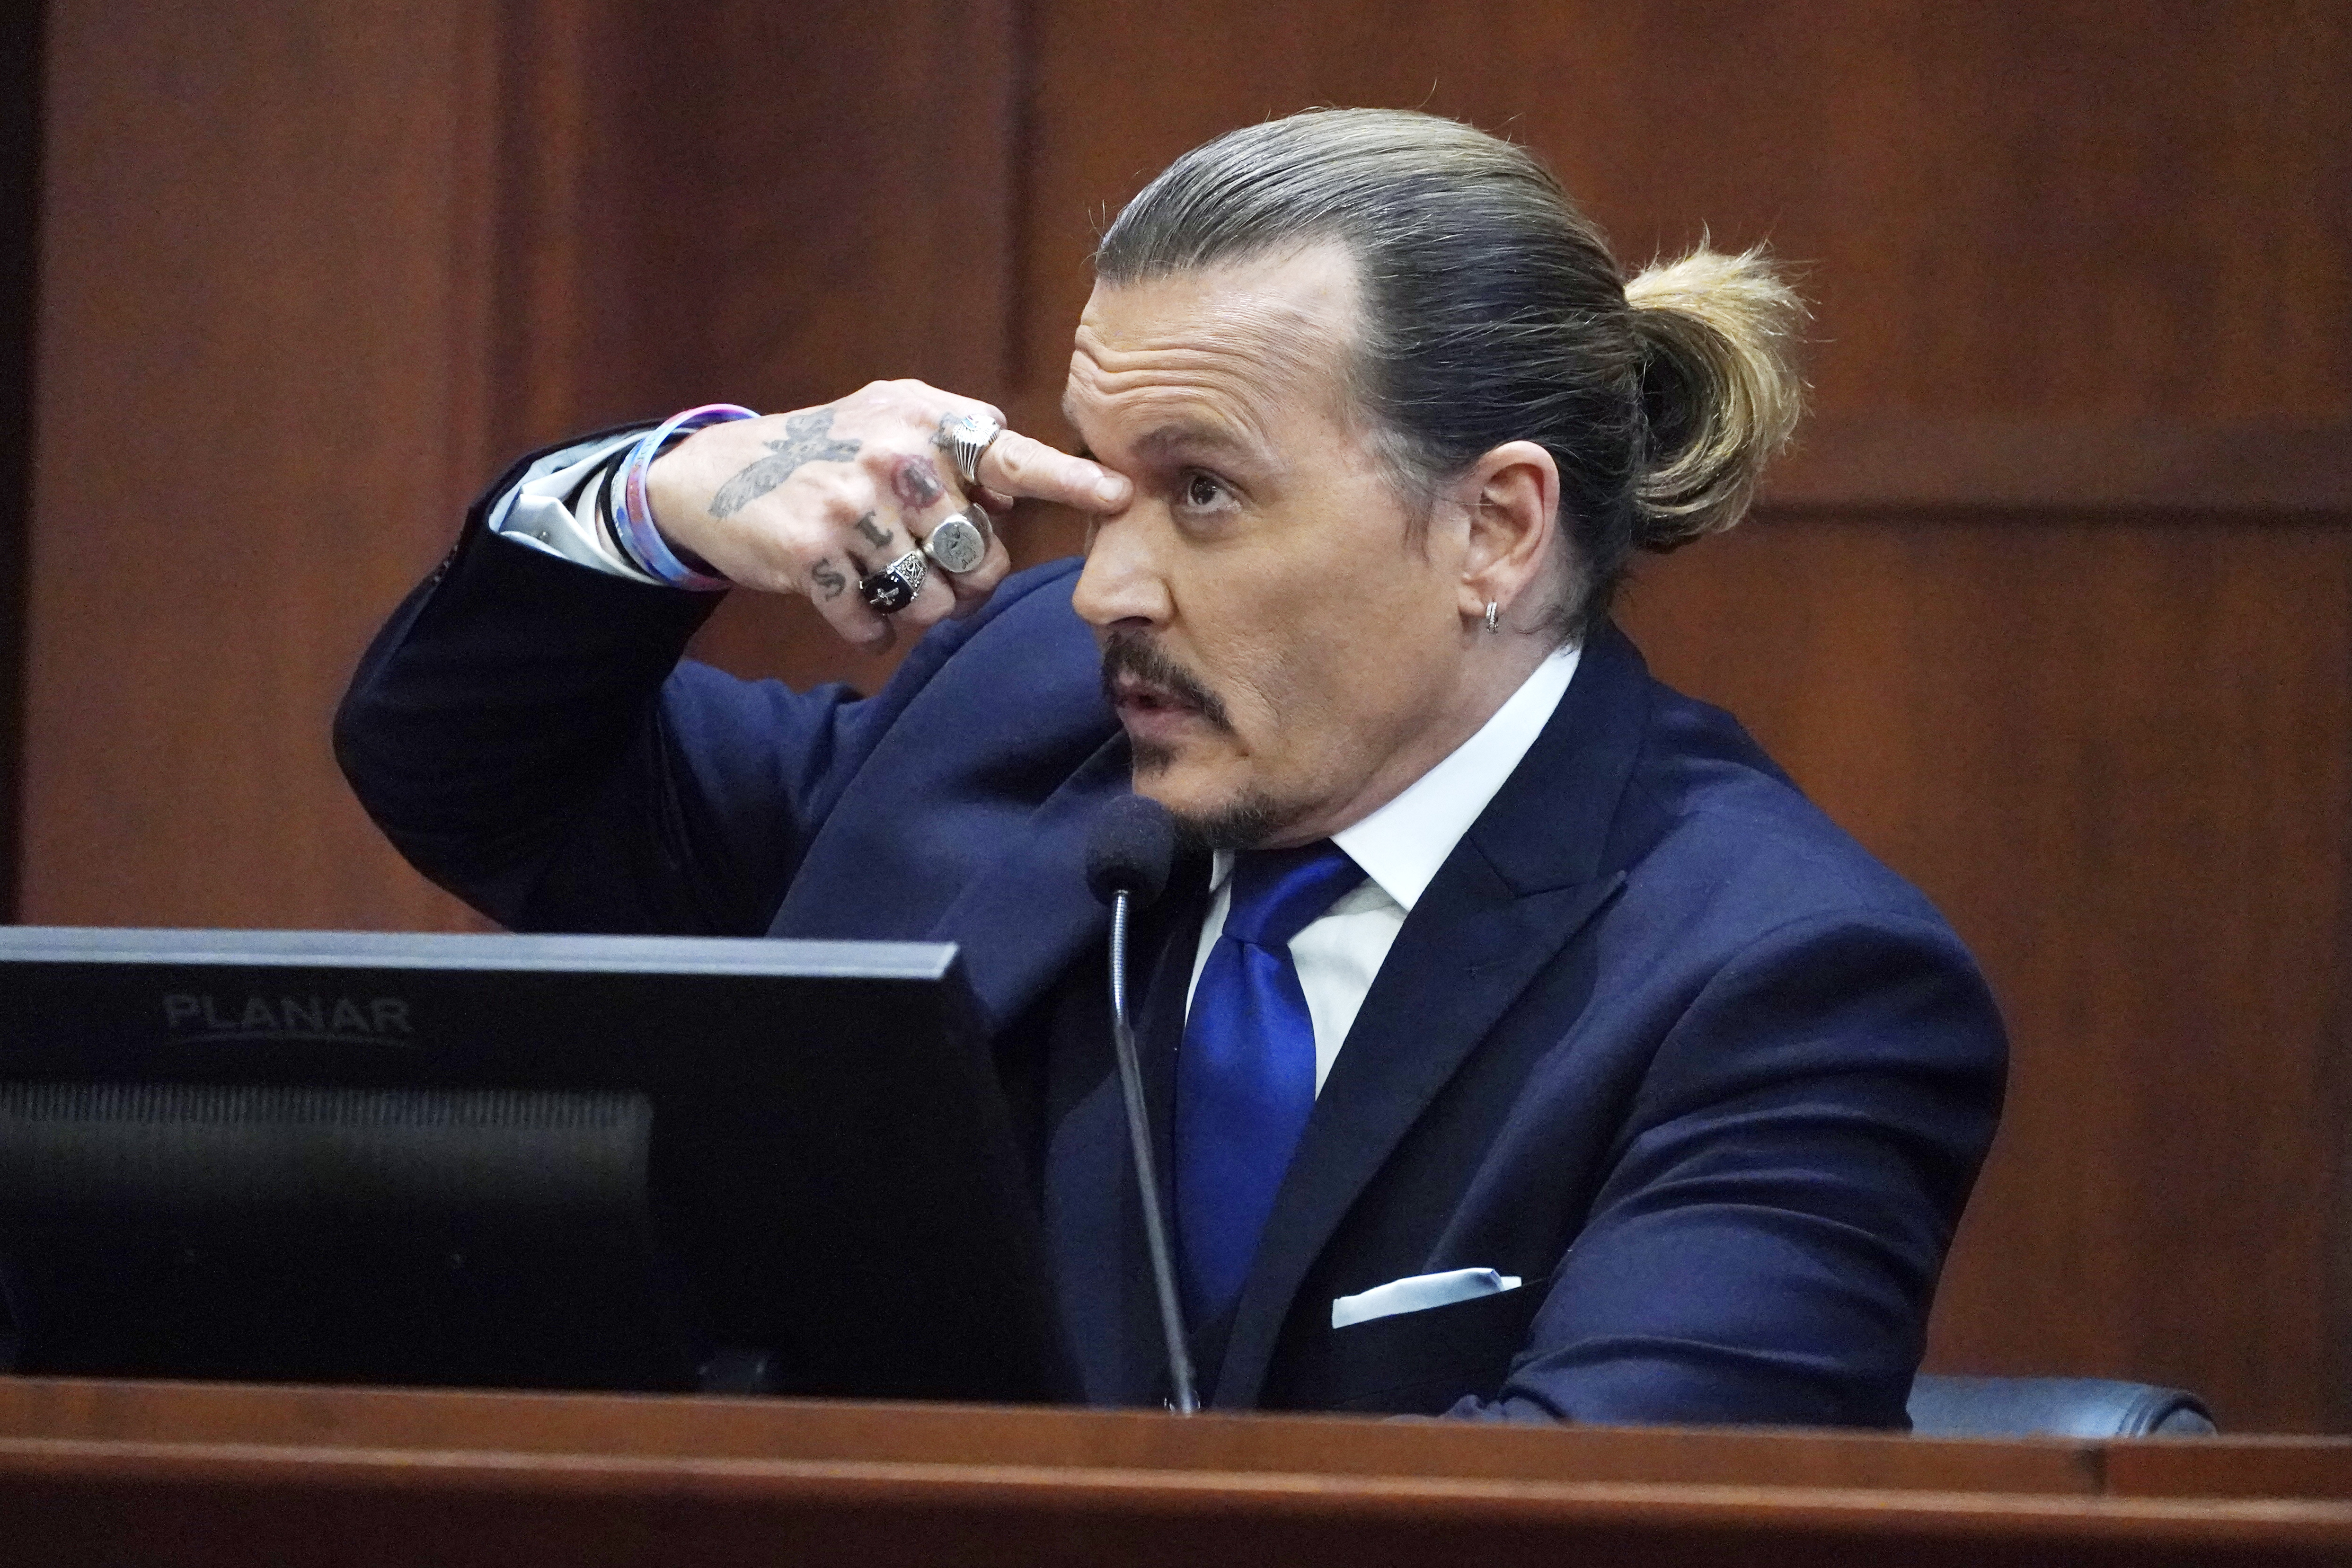 Actor Johnny Depp testifies that a can of mineral spirits actress Amber Heard through, hit him there, in the courtroom at the Fairfax County Circuit Courthouse in Fairfax, Virginia, April 25, 2022. - Actor Johnny Depp sued his ex-wife Amber Heard for libel in Fairfax County Circuit Court after she wrote an op-ed piece in The Washington Post in 2018 referring to herself as a 